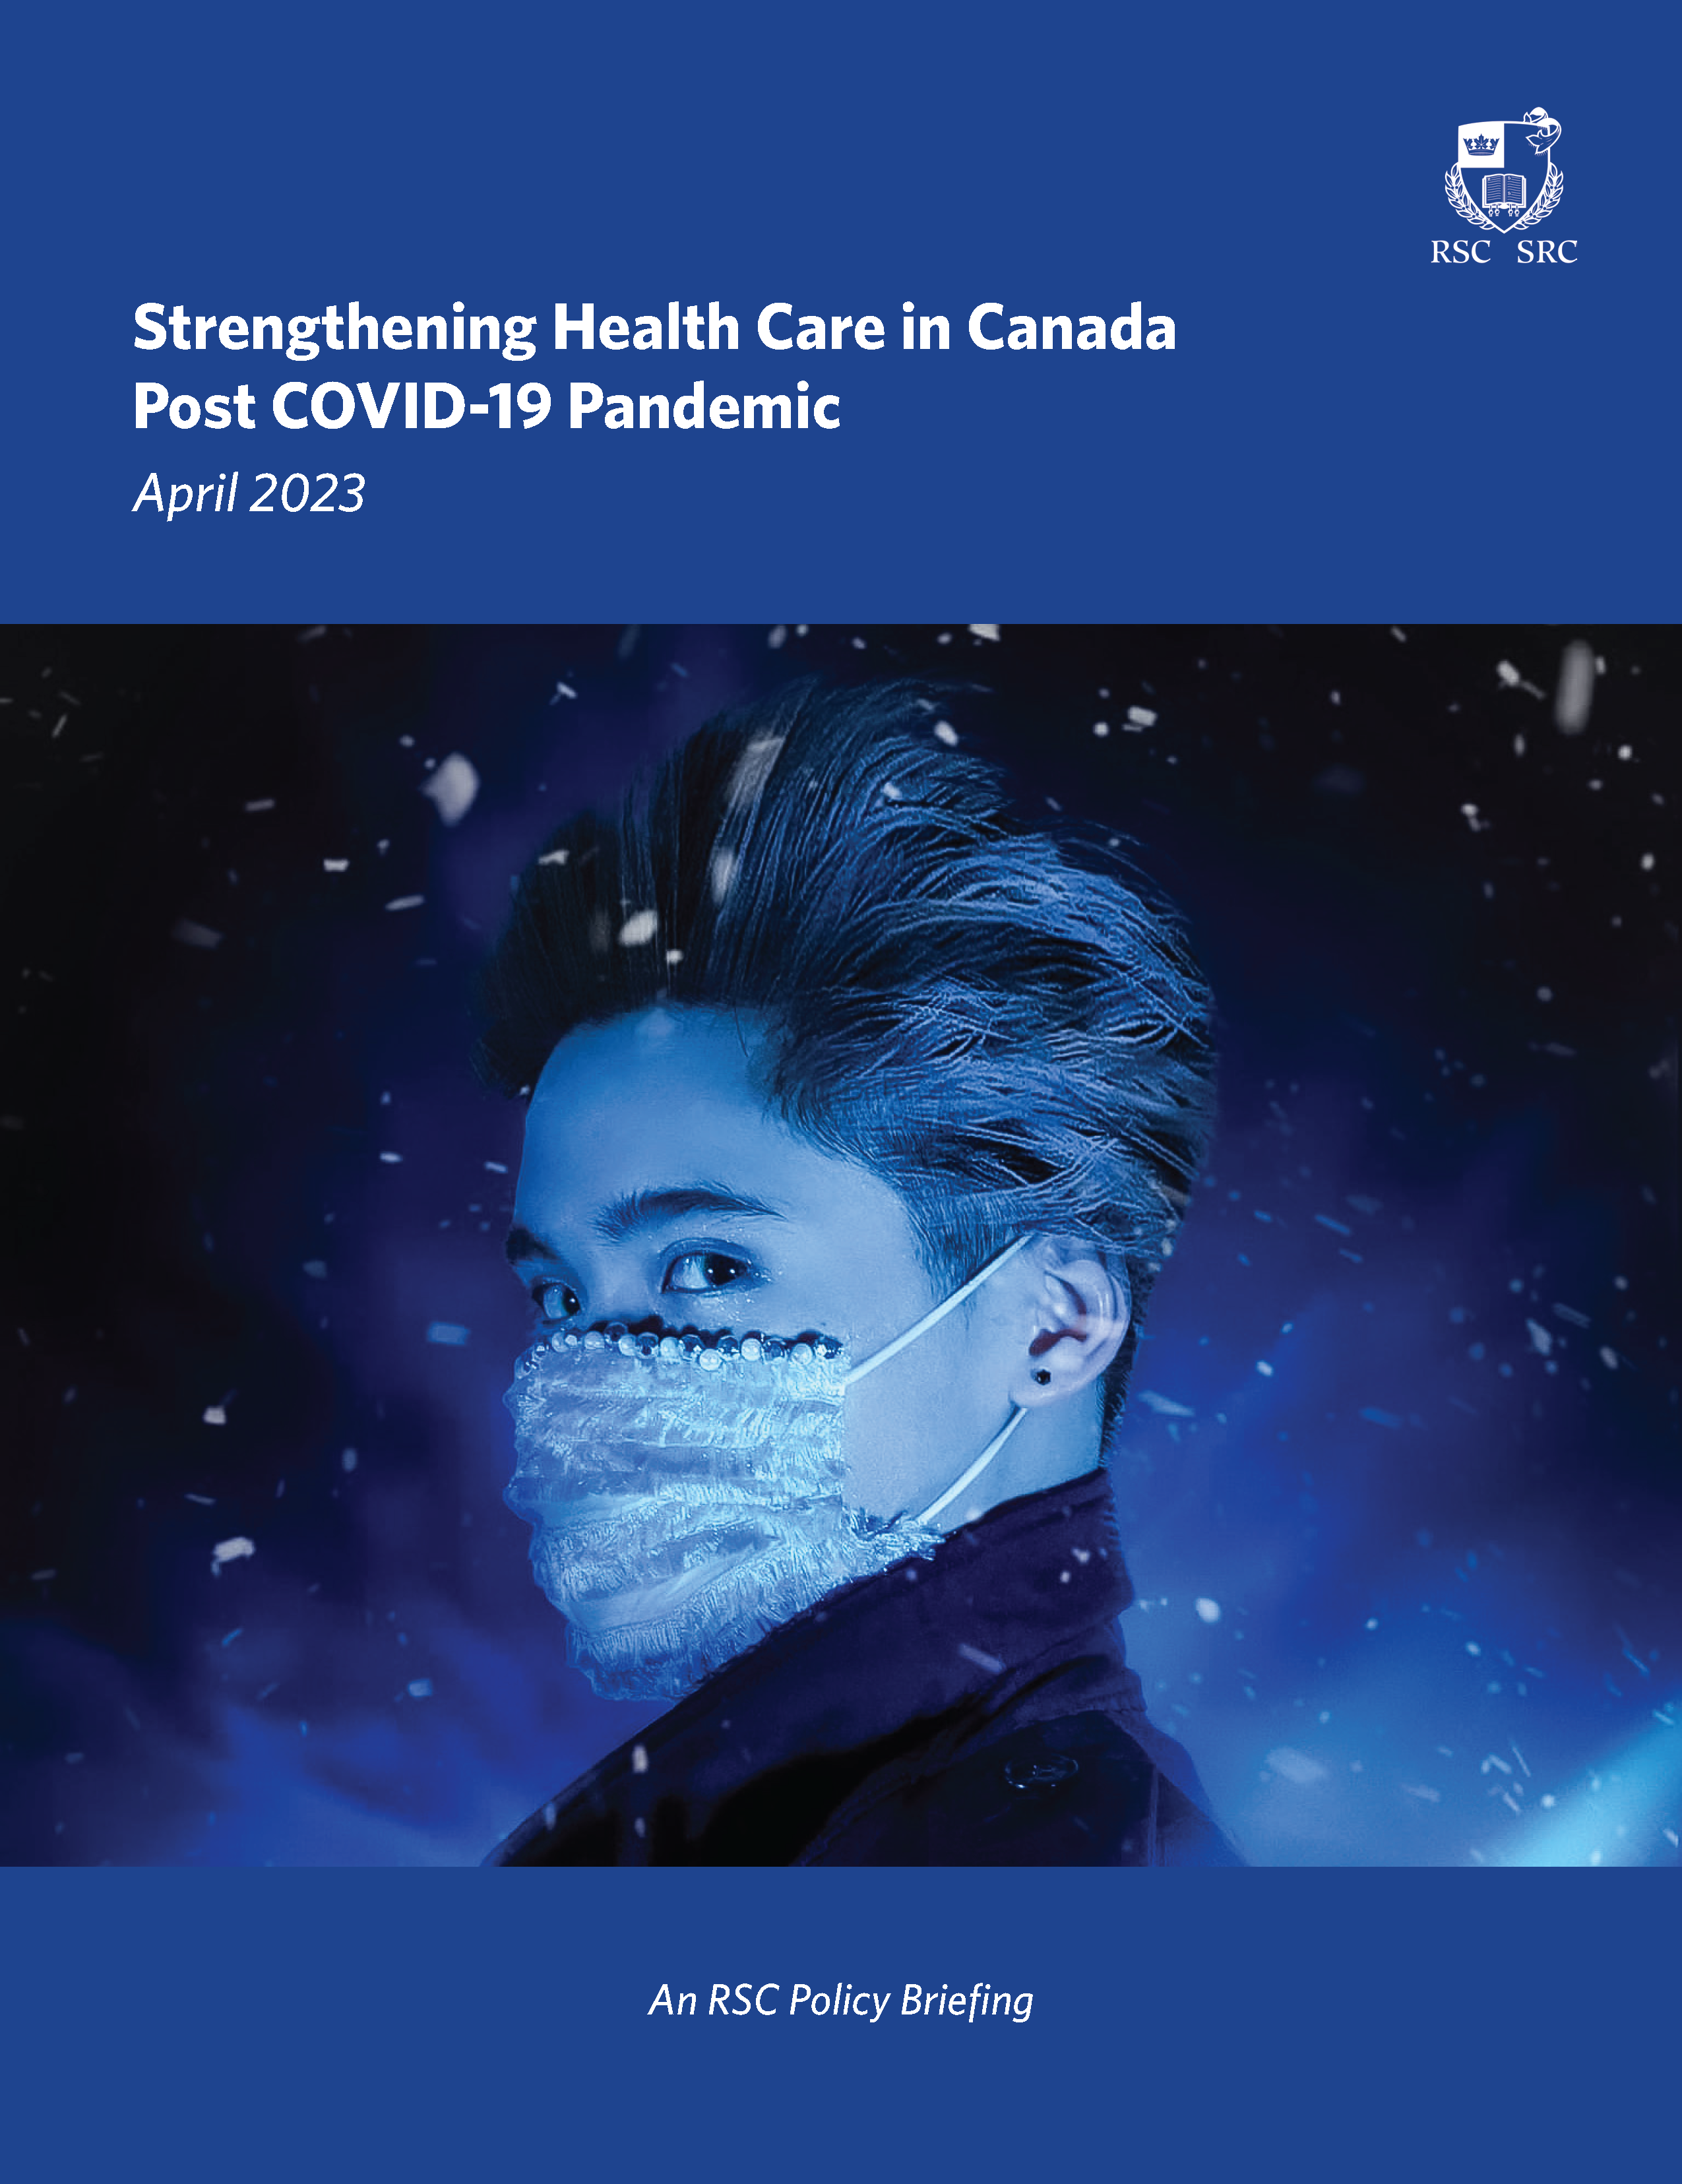 Strengthening Health Care in Canada Post COVID-19 Pandemic